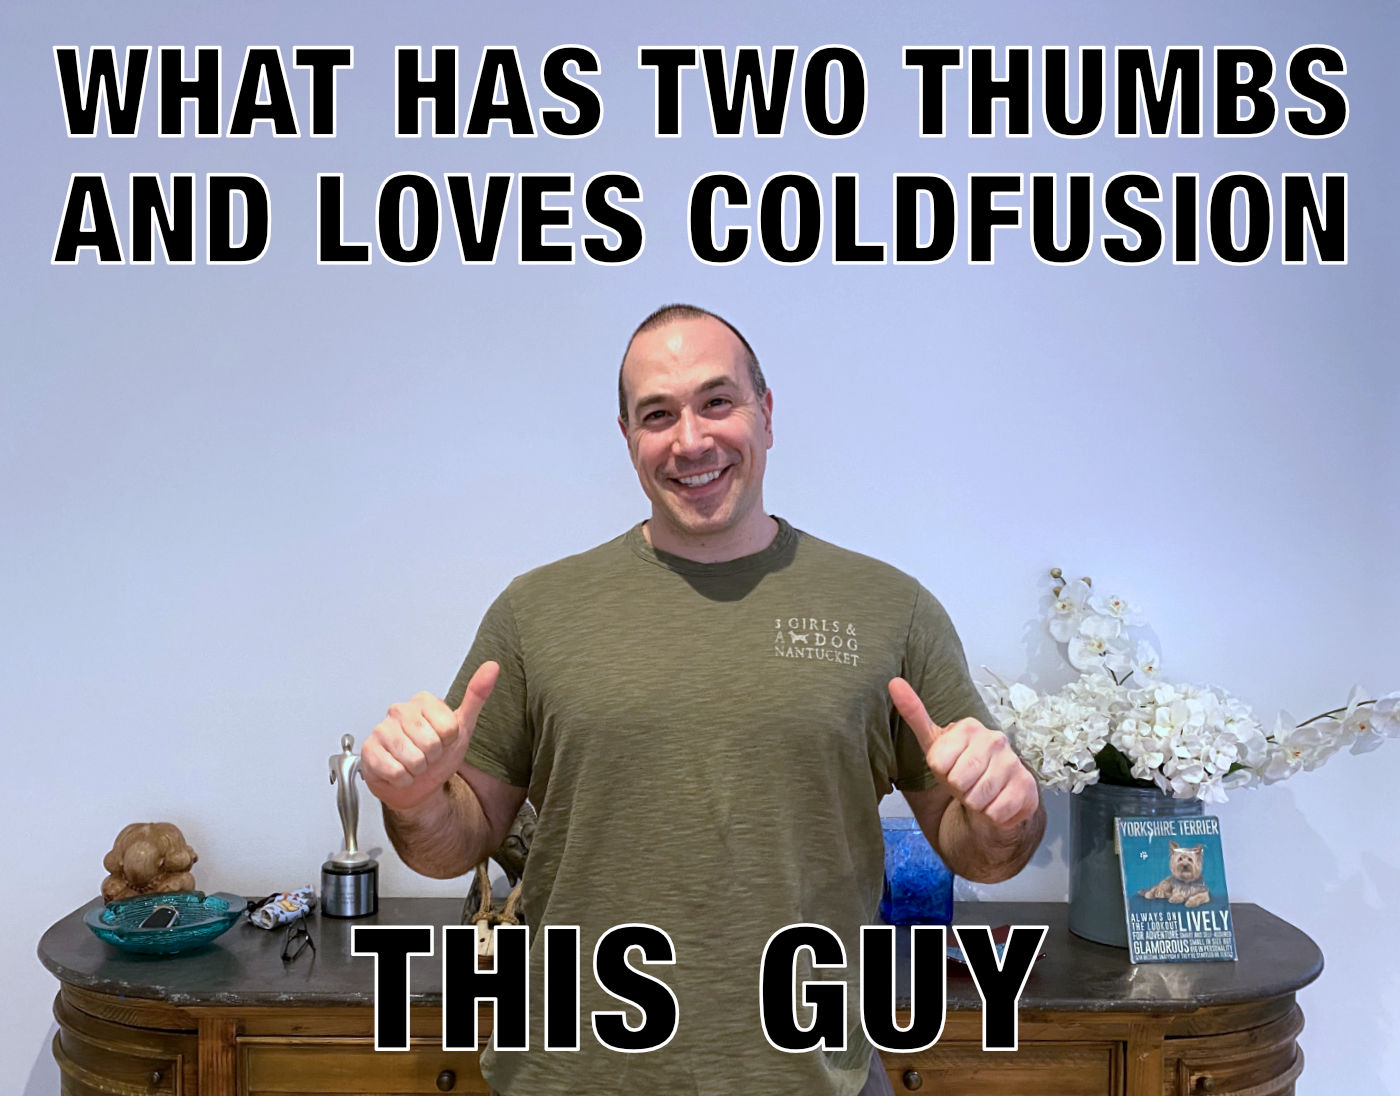 What has two thumbs and loves ColdFusion? THIS GUY! (Ben Nadel)